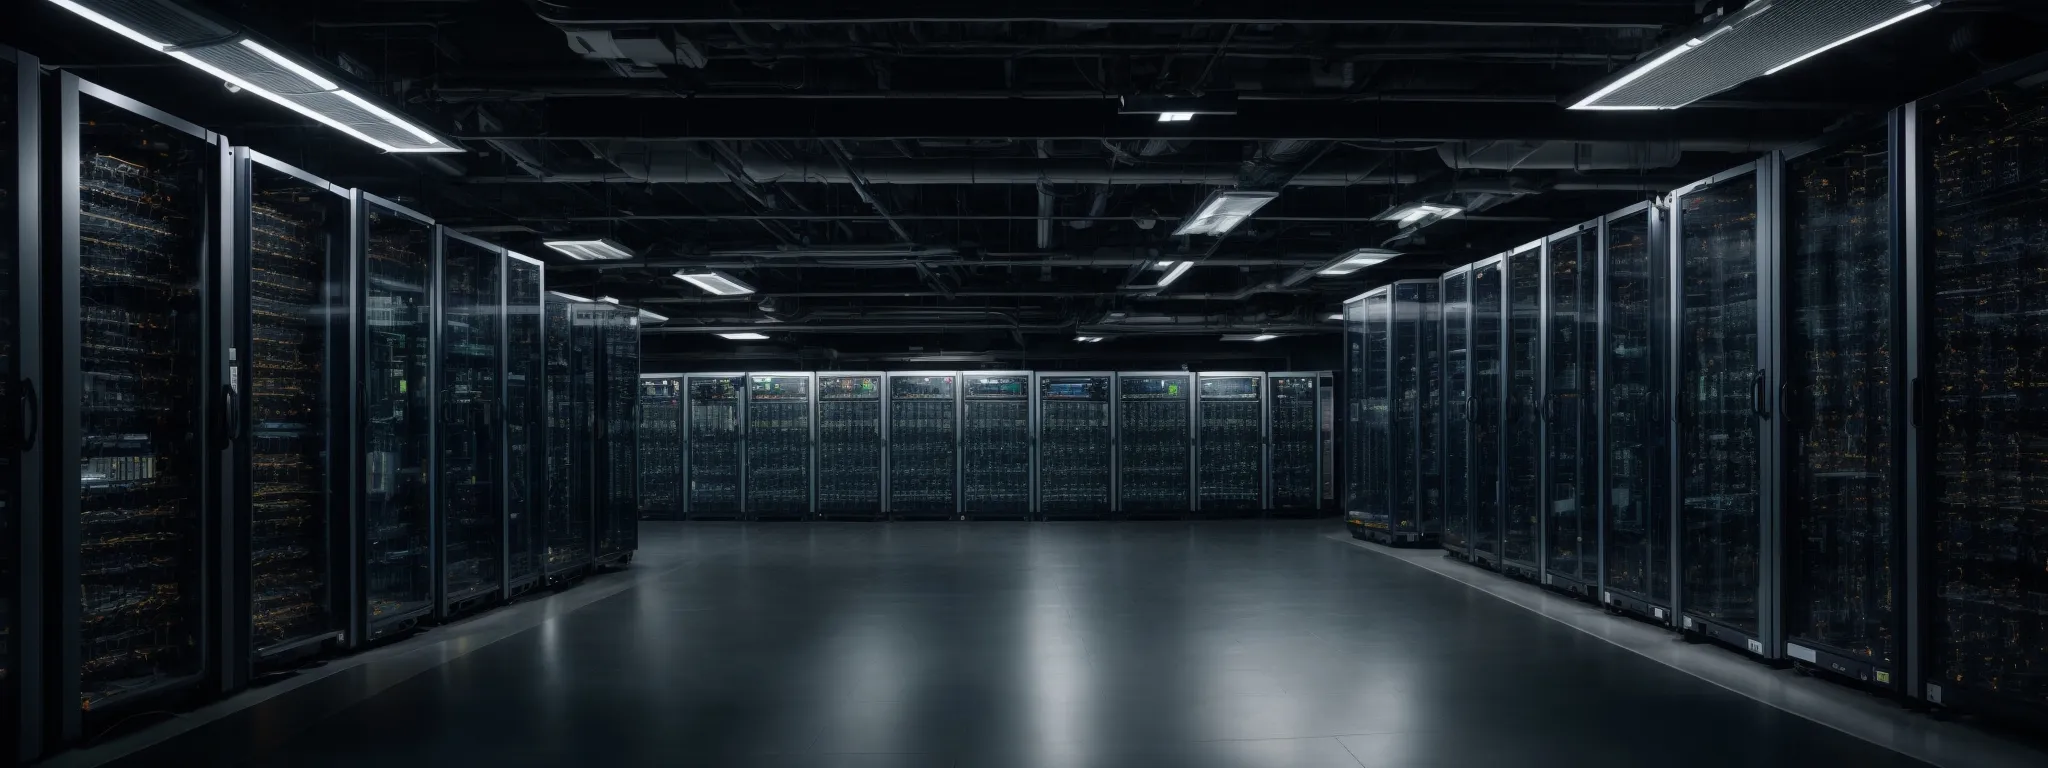 a sprawling server room with rows of high-tech equipment indicating a focus on digital infrastructure and optimization.